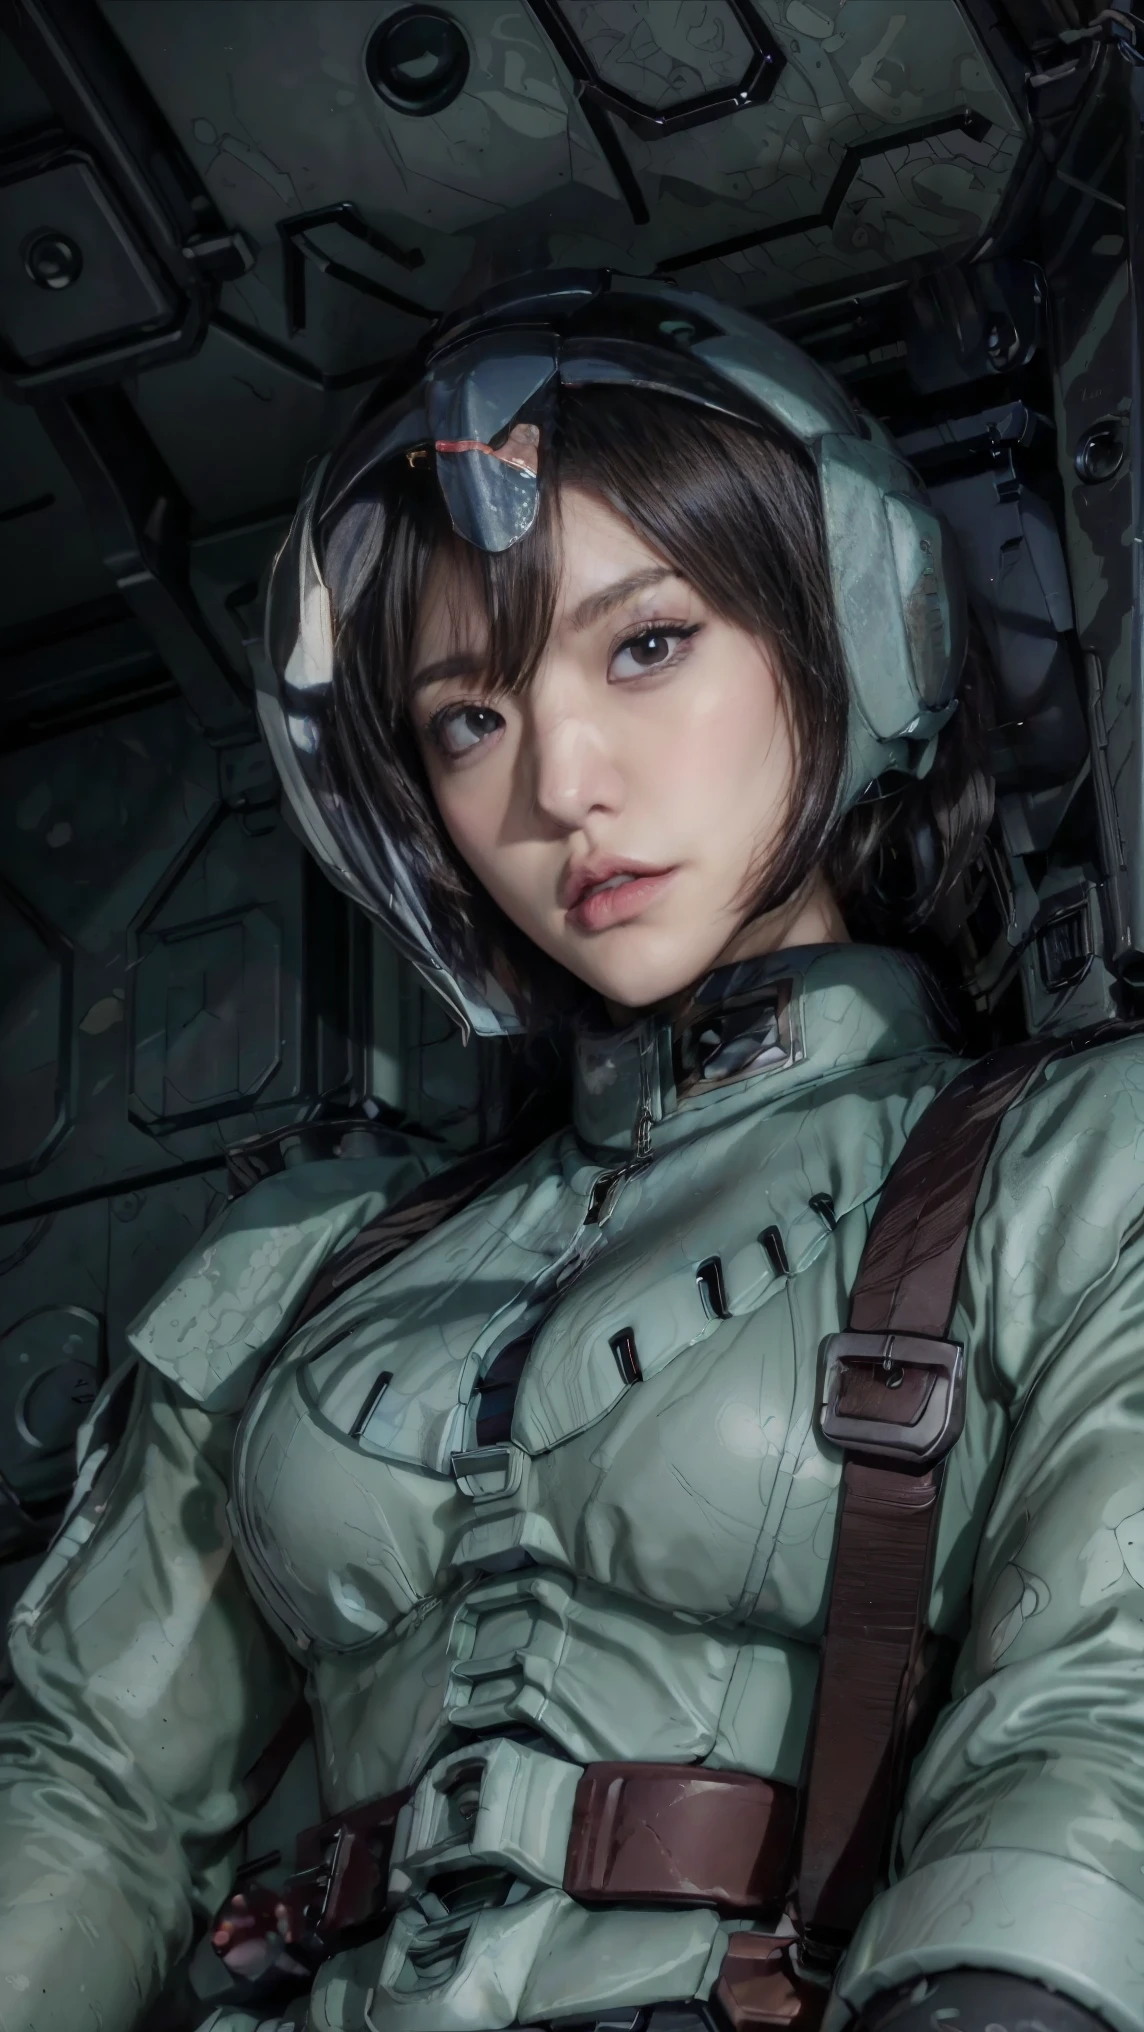 (((masterpiece,highest quality,In 8K,Very detailed,High resolution,Anime Style,absolutely))),A female Zeon pilot sitting in the cockpit,(alone:1.5),(Angelina Jolie:1.5),(((The background is a dark mobile suit cockpit..:1.5))),((Blur the background:1.5)),(Wearing a pilot suit:1.5),((Wearing a full-face helmet:1.5)),(Beautiful woman:1.5),(Detailed facial depiction:1.5),(Big Breasts:1.3),(wallpaper:1.5),(From below:1.5)